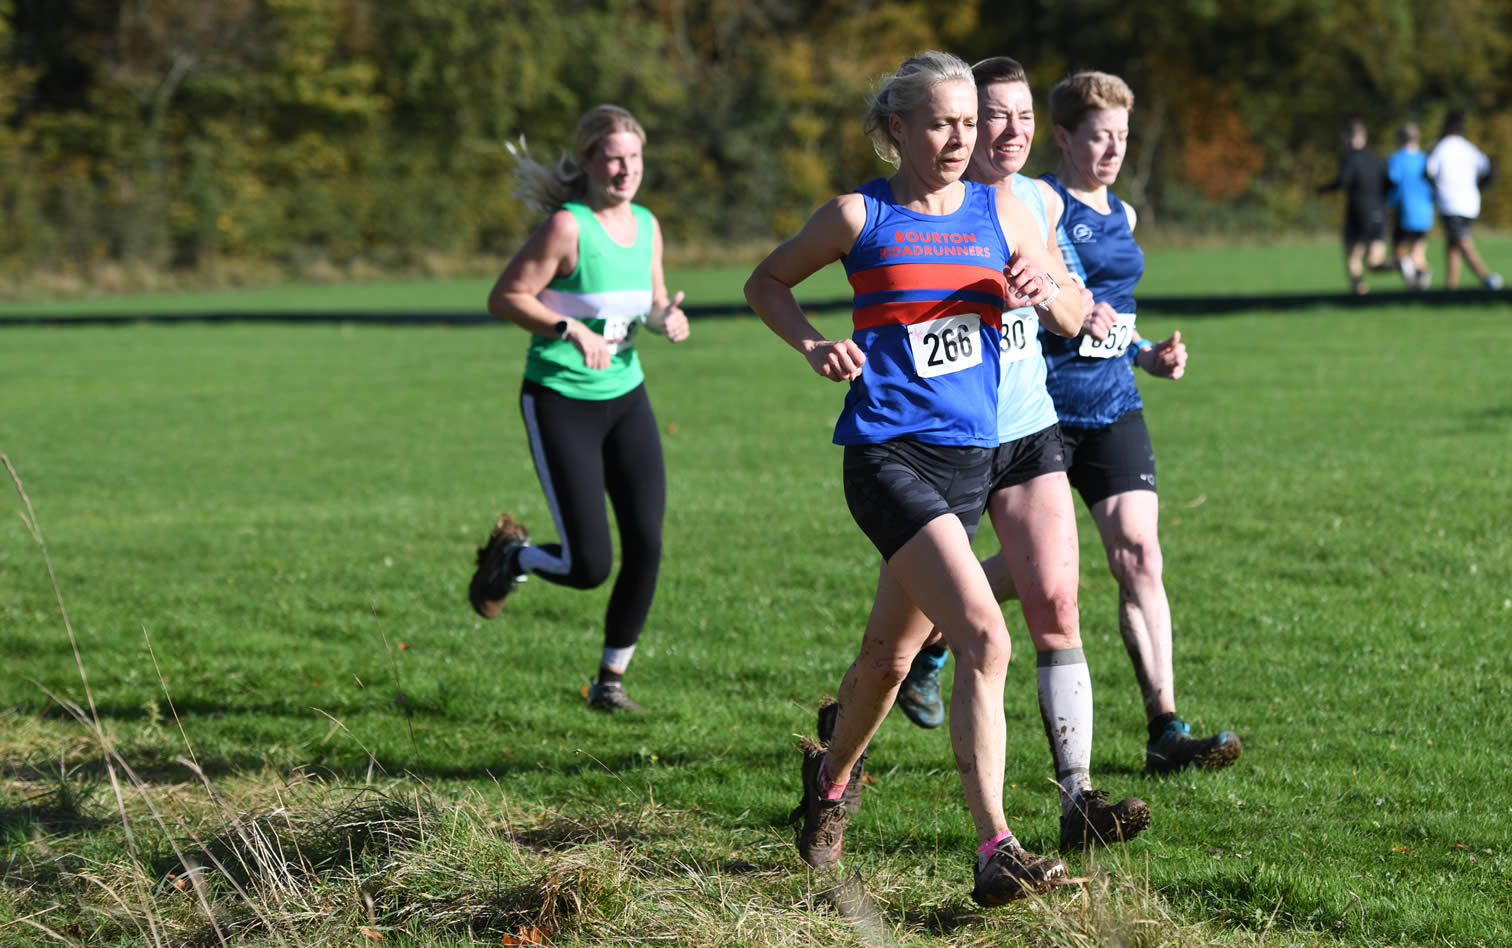 Jennie Glass at Gloucestershire AAA Cross Country League, Cirencester Park - 30th October 2021